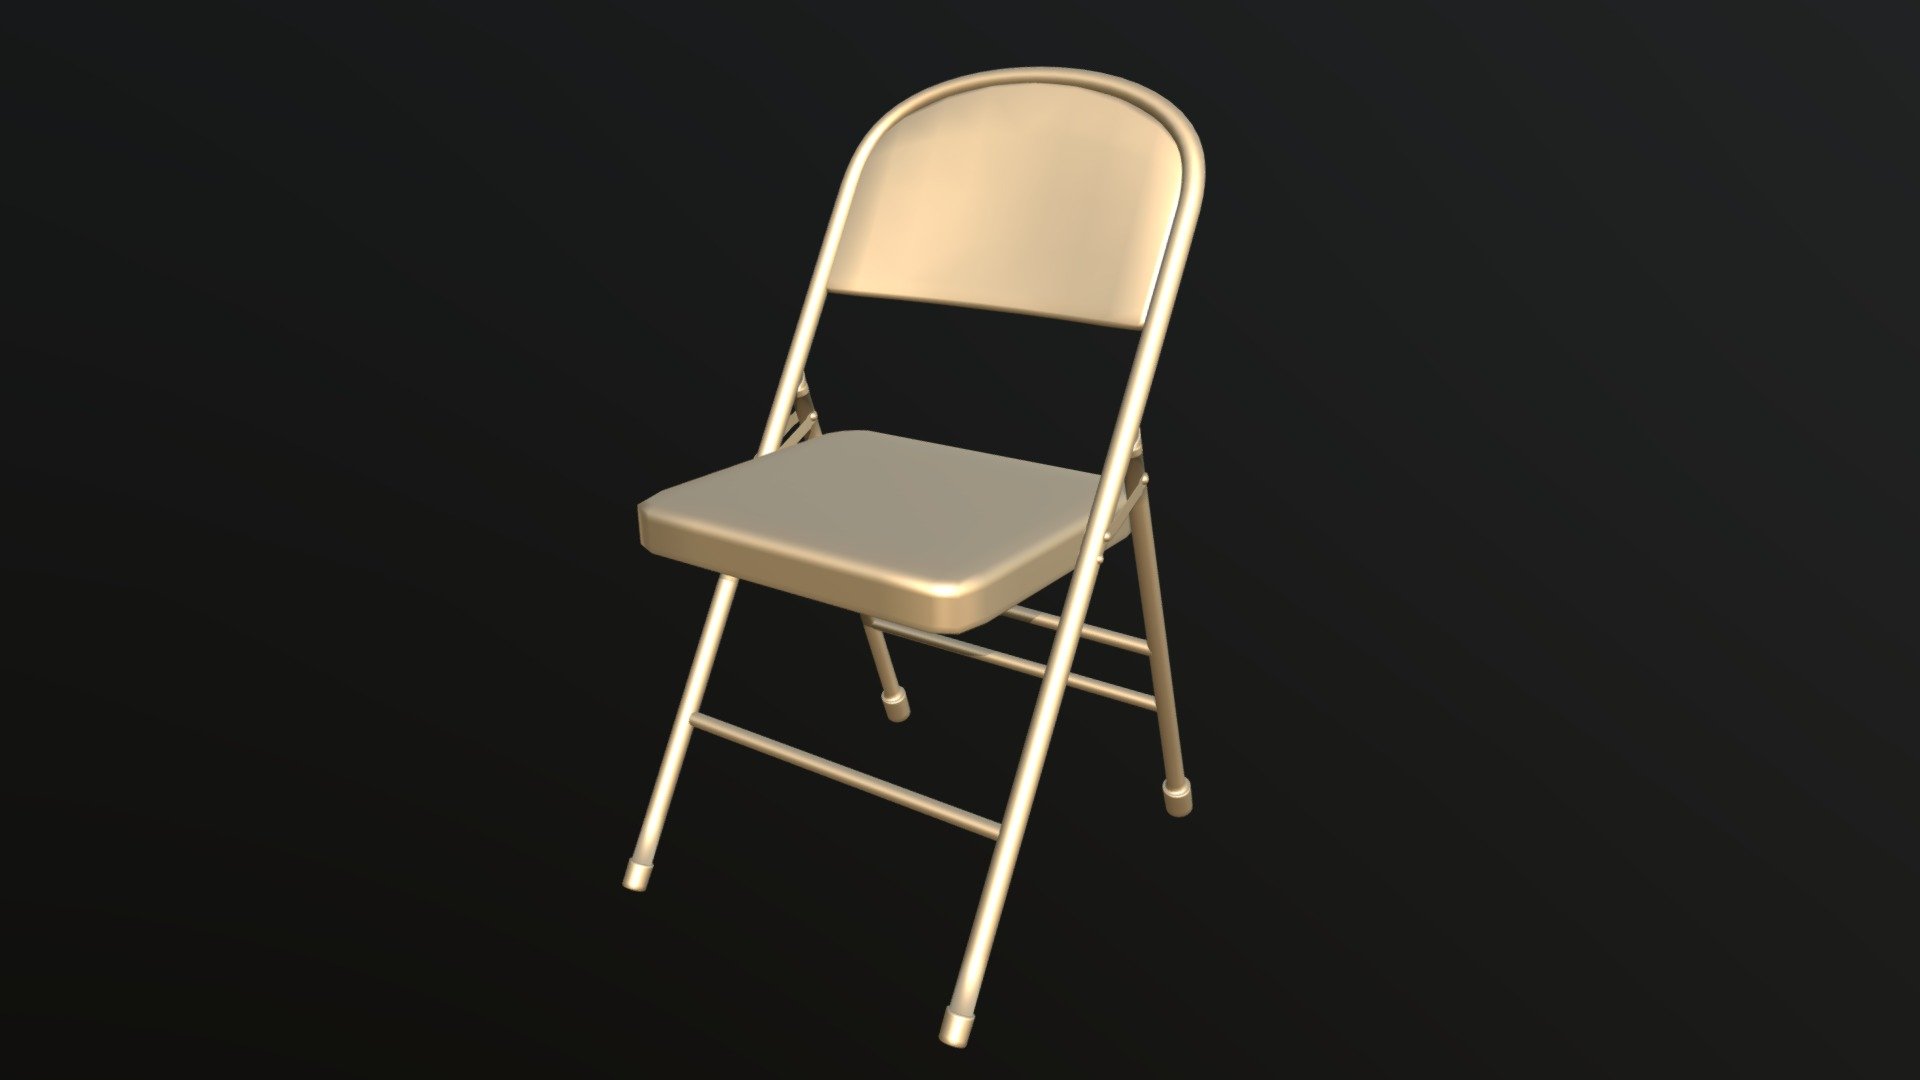 Folding Chair.  Download file contains FBX and Rigged Maya scene file 3d model